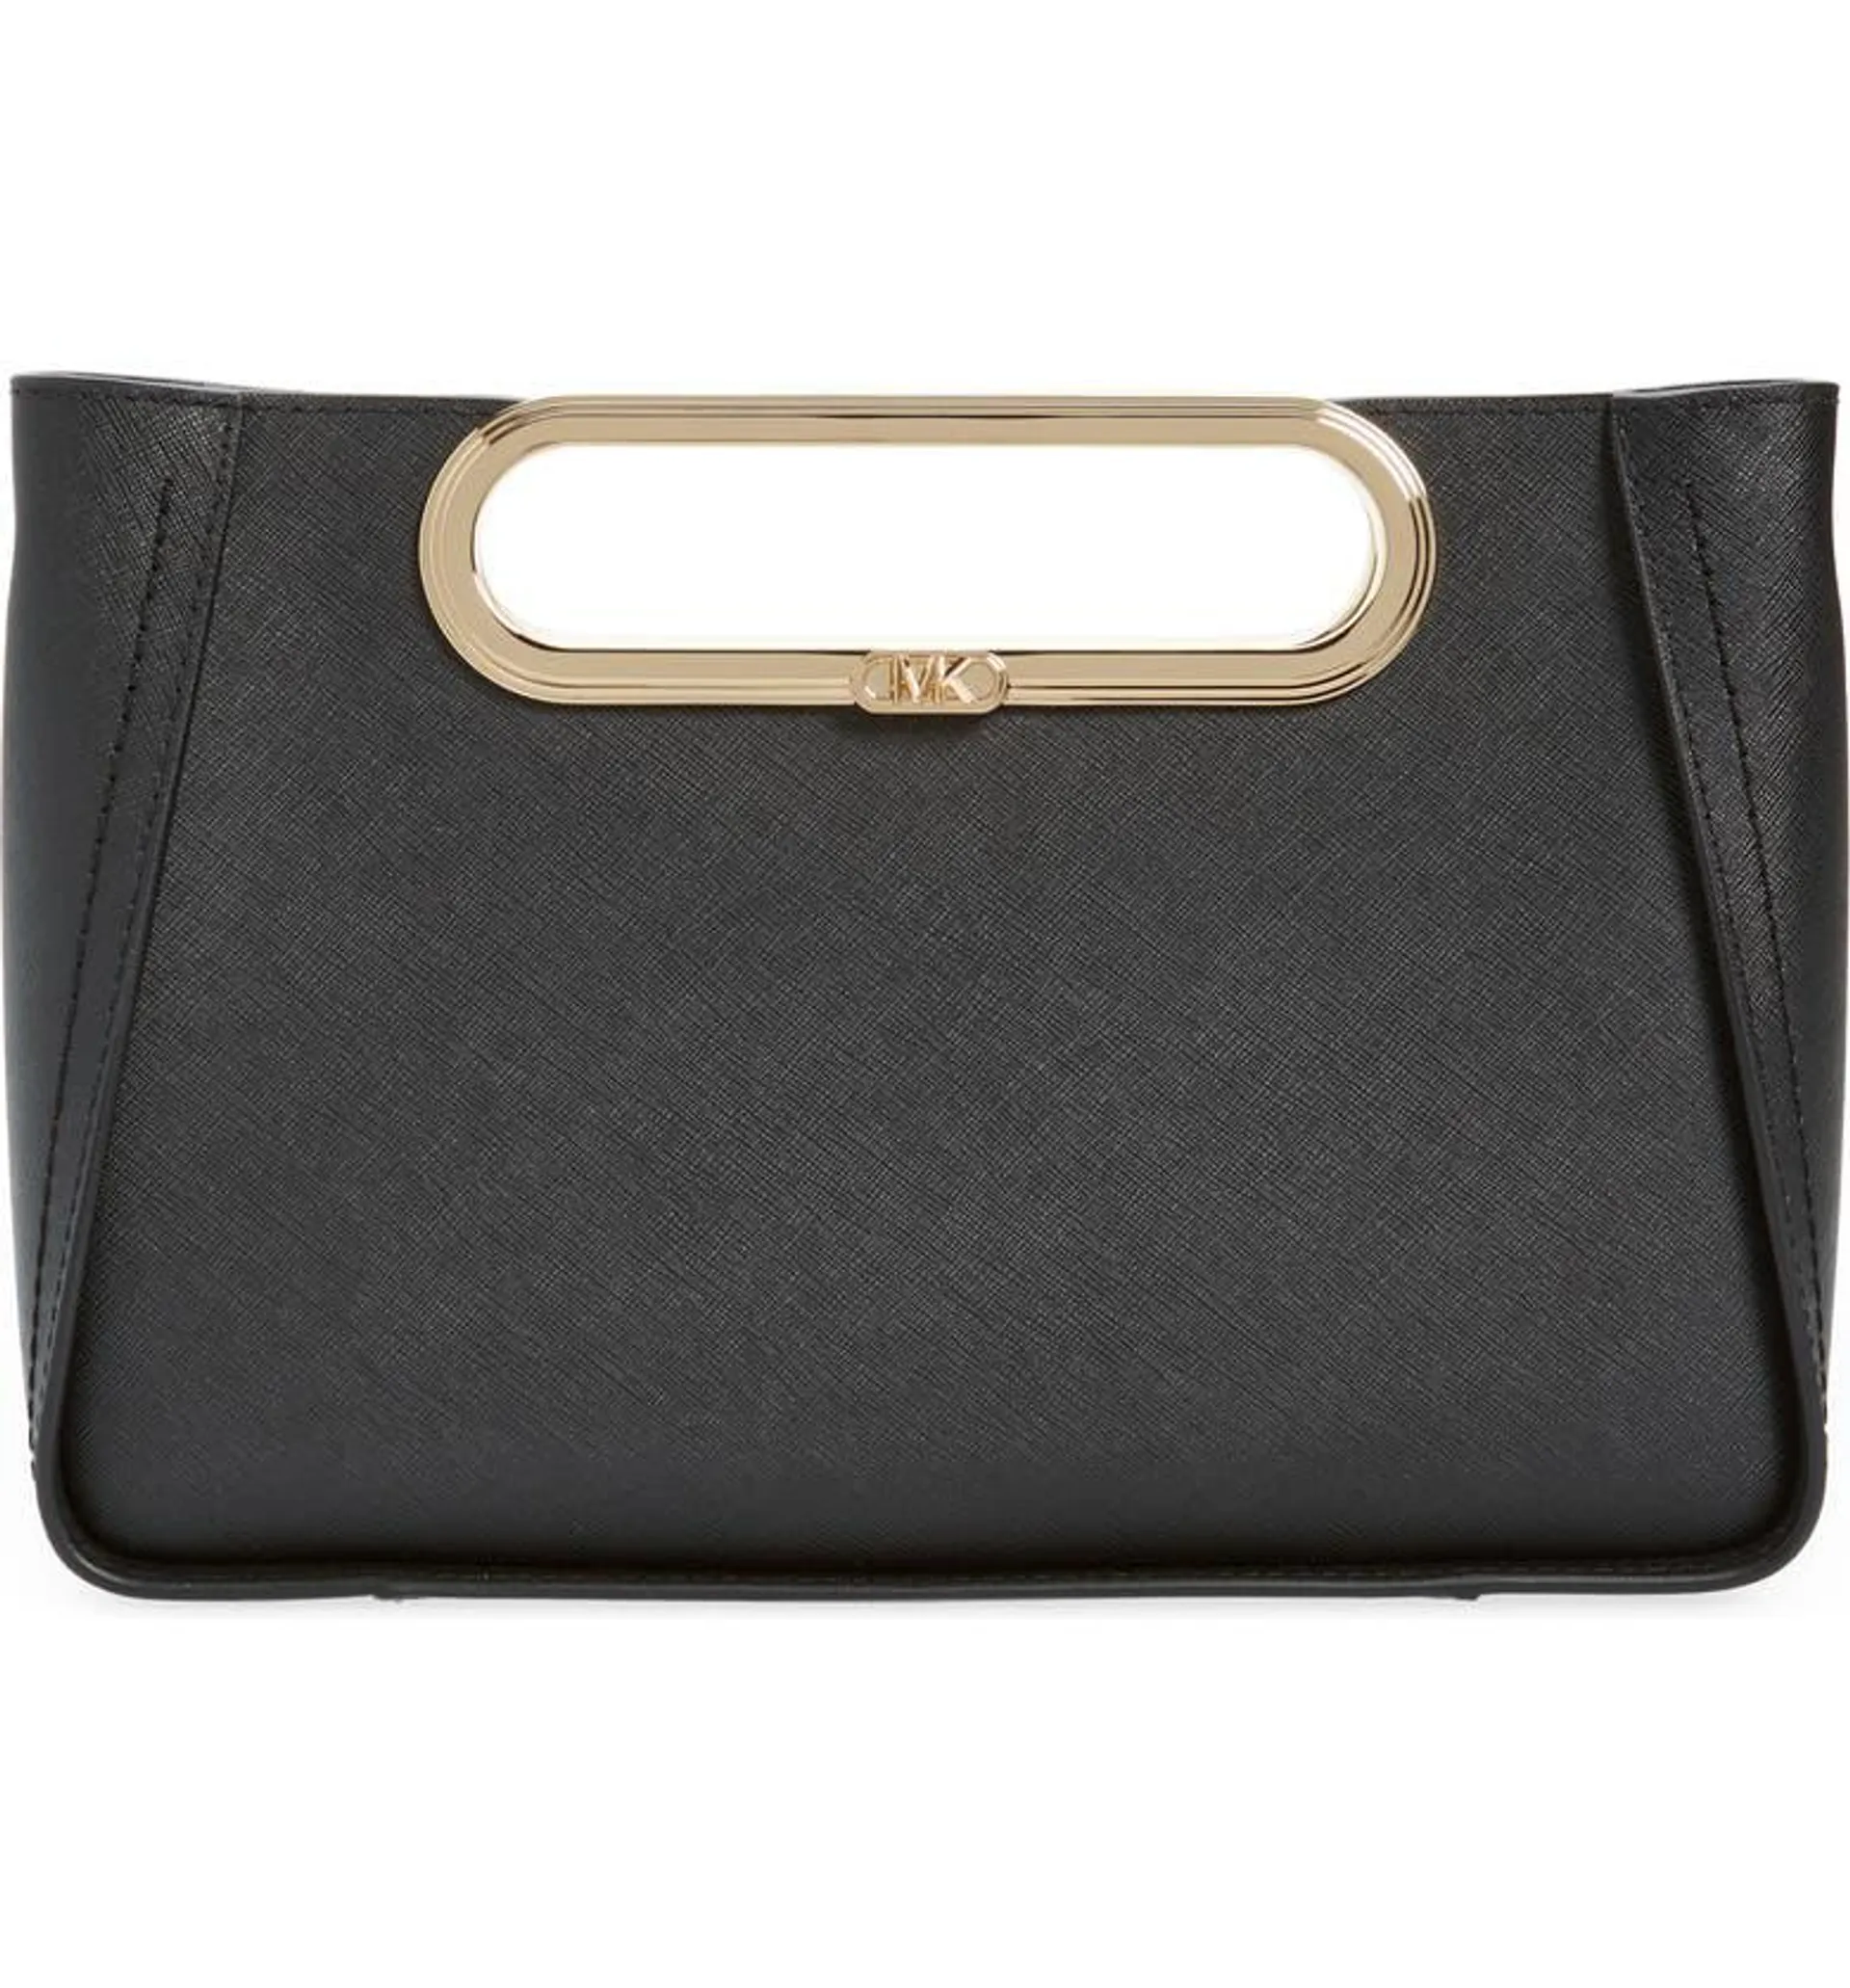 Large Chelsea Convertible Leather Clutch